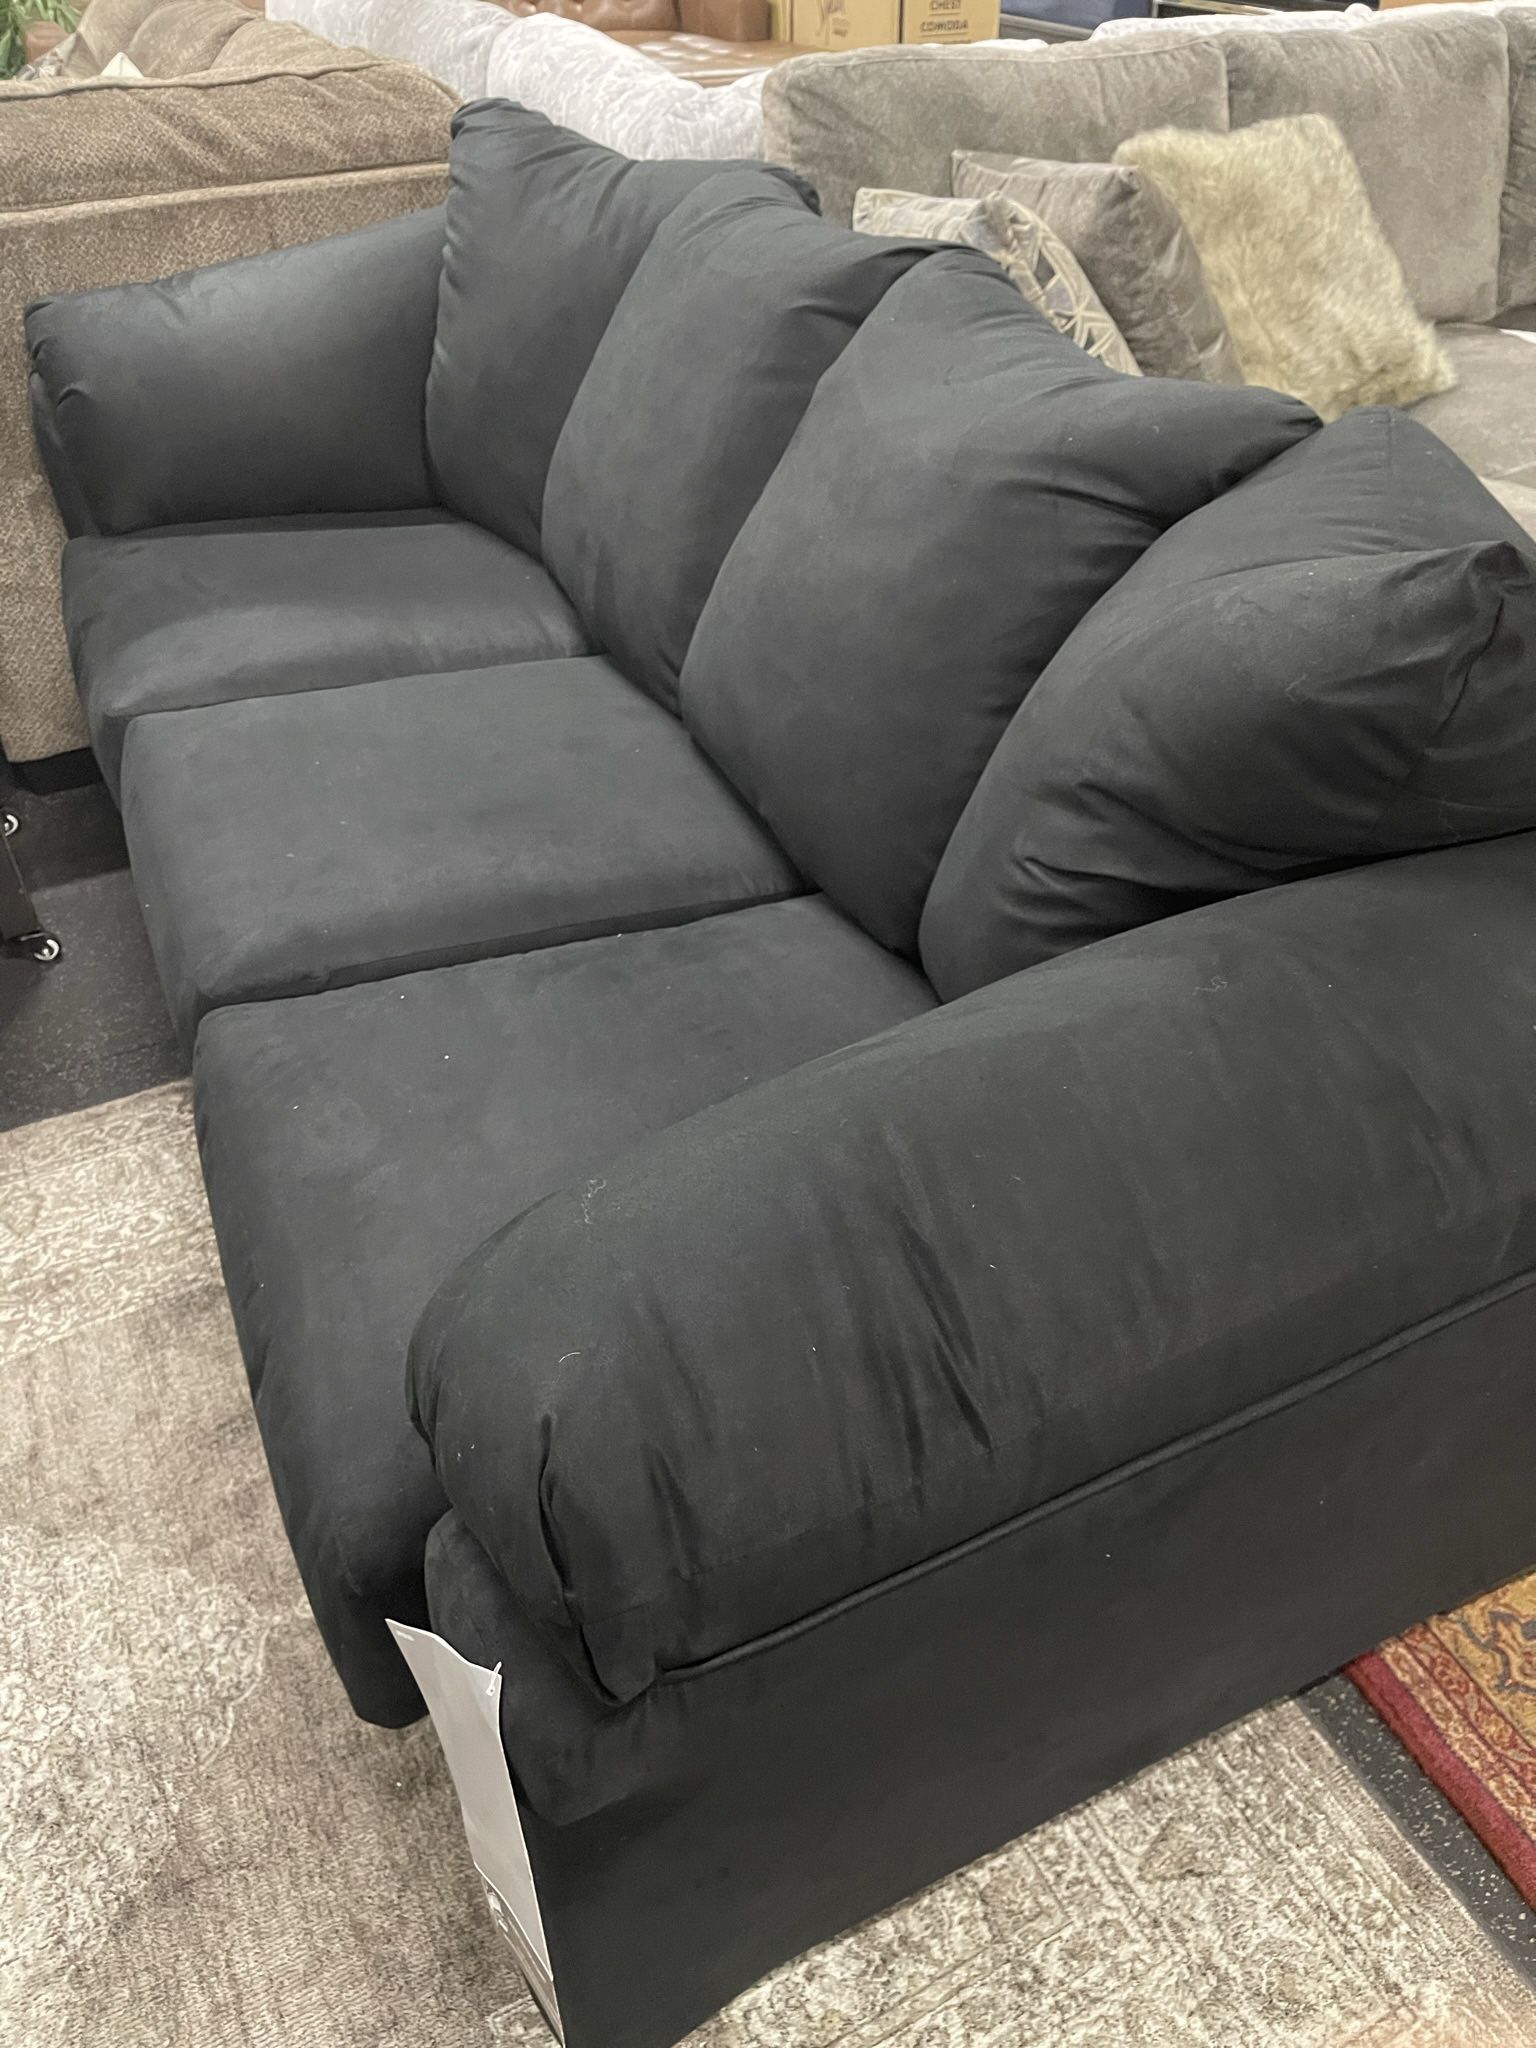 Sofa And Love Seat On Sale